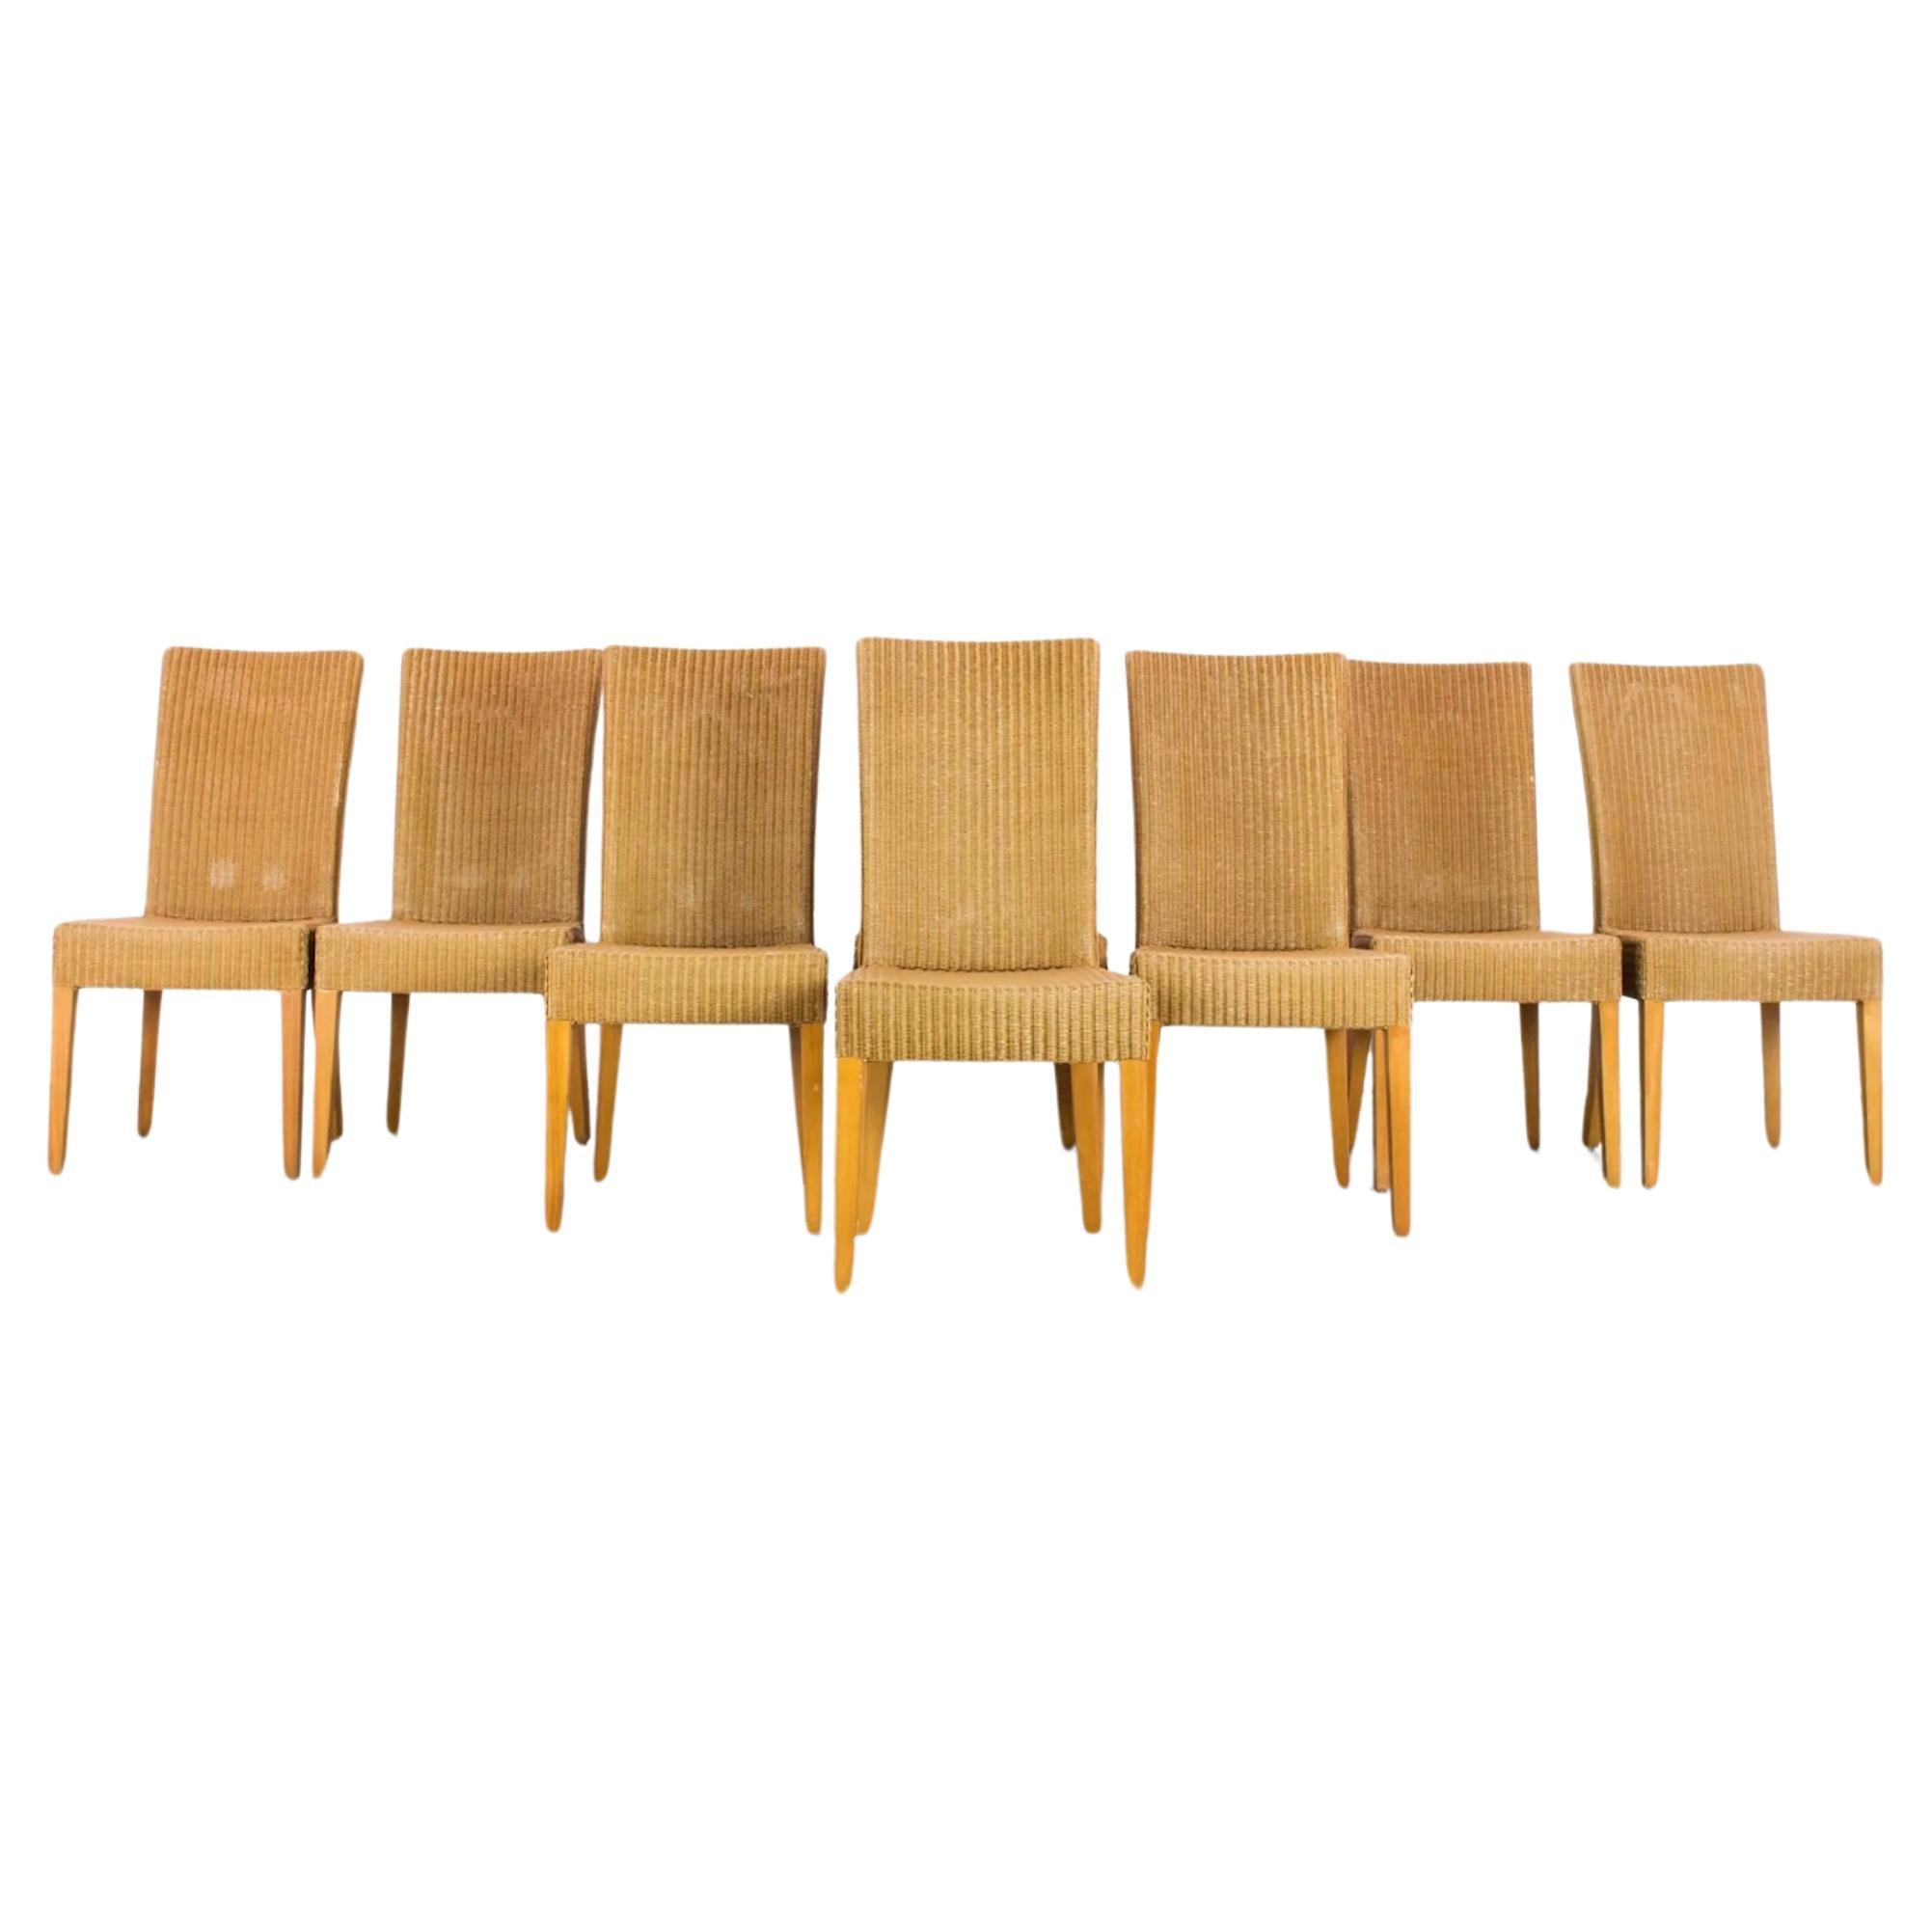 Post-Modern Set of 8 Vintage Mid Century All Wicker Dining room chairs by Lloyd Loom For Sale